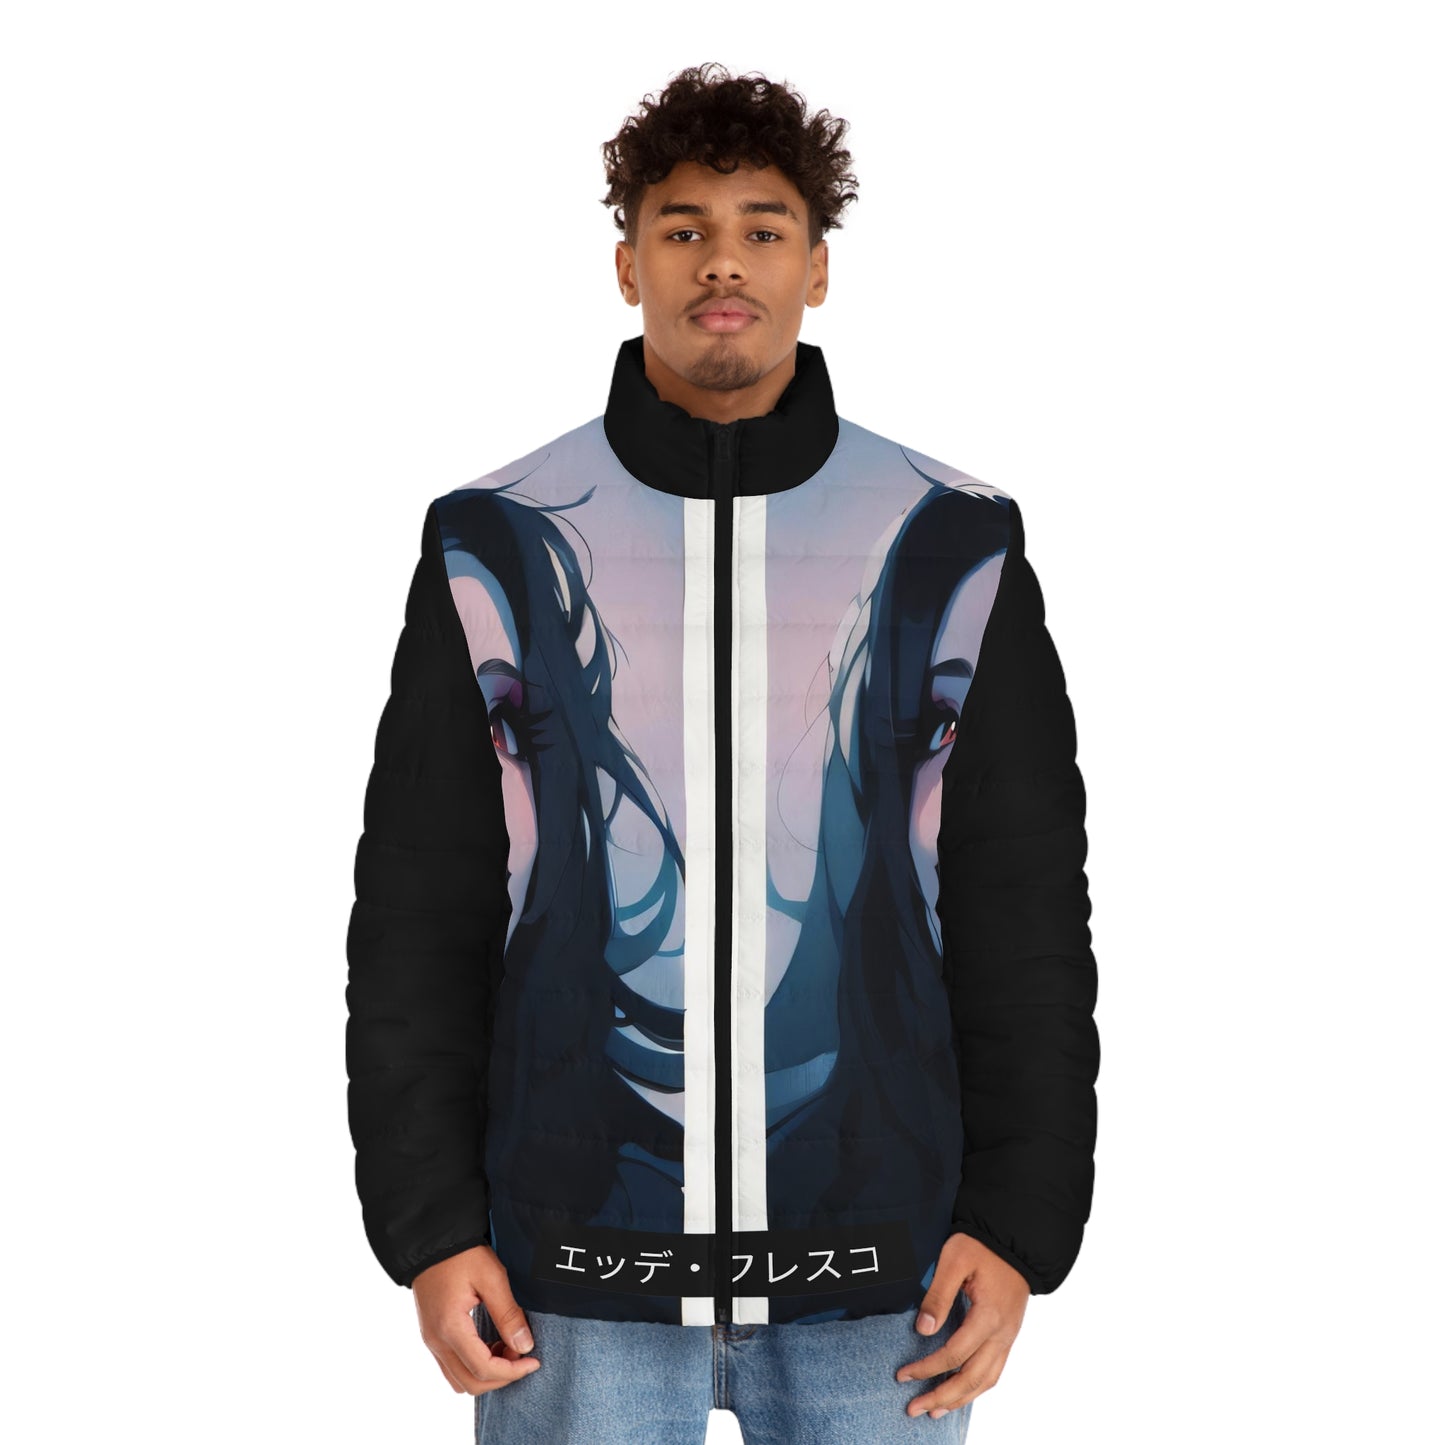 Anime Style Art Men's Puffer Jacket (AOP)- "Smiling Faces"